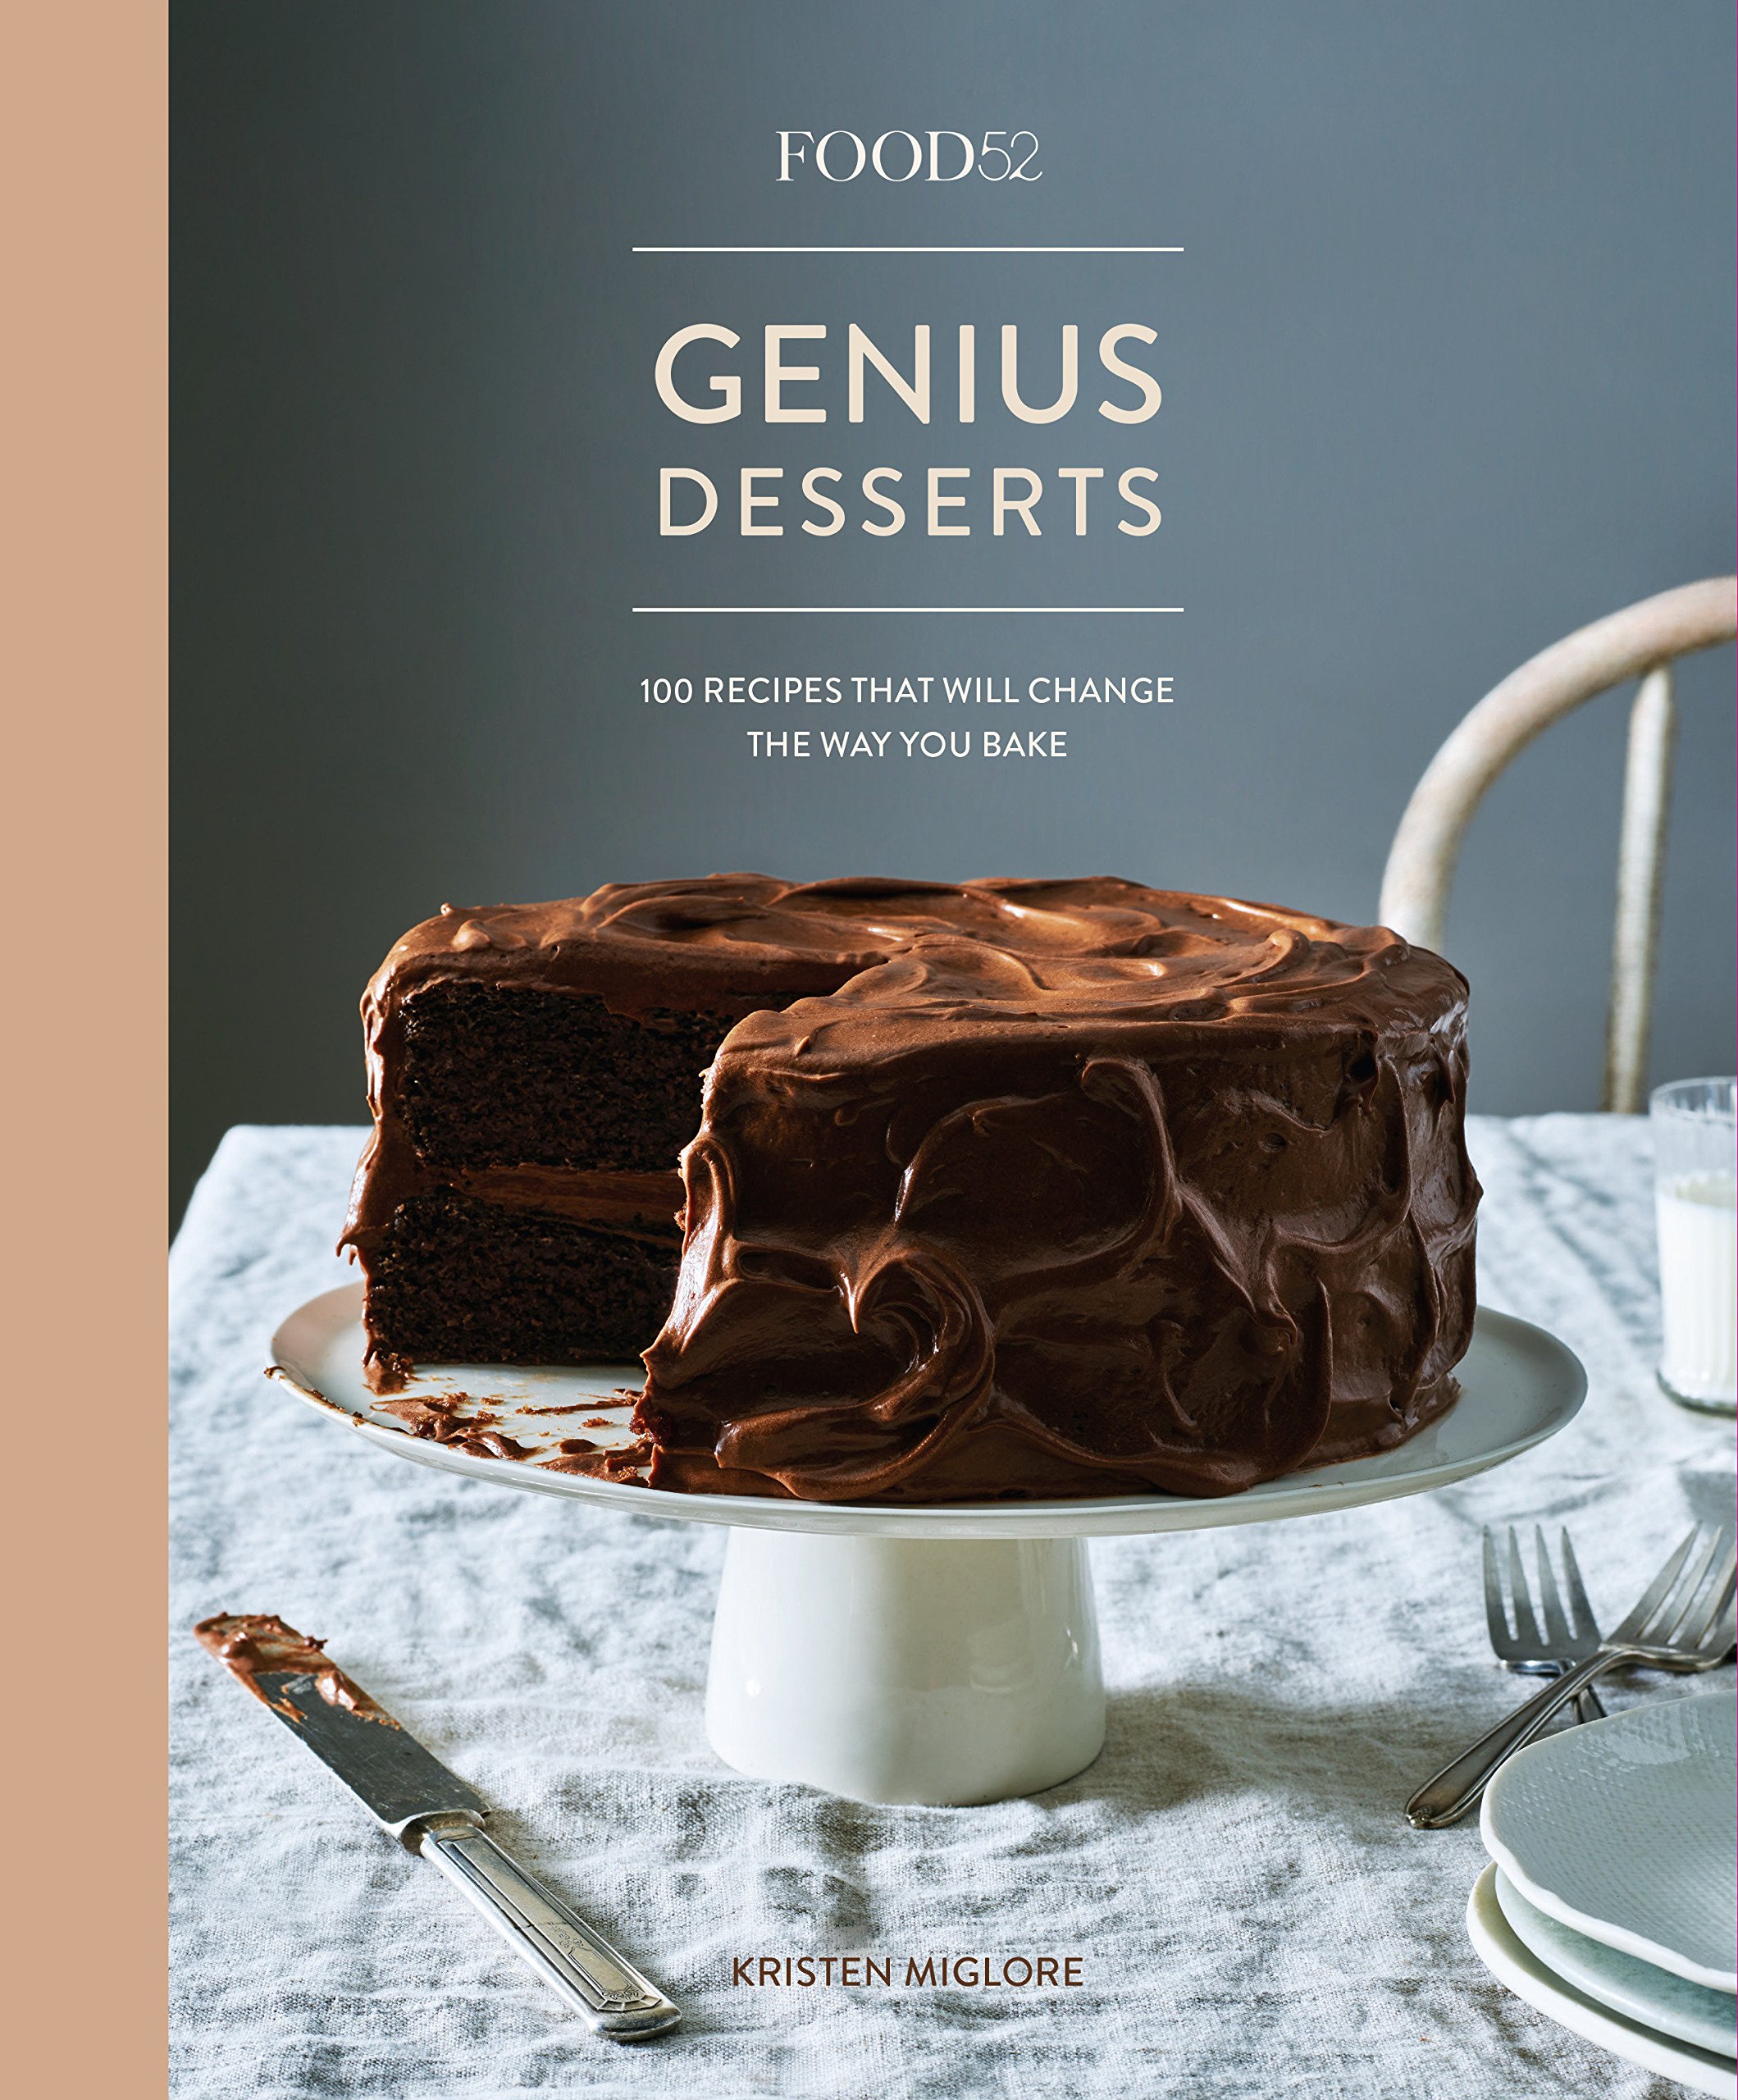 Book Cover Food52 Genius Desserts: 100 Recipes That Will Change the Way You Bake [A Baking Book] (Food52 Works)